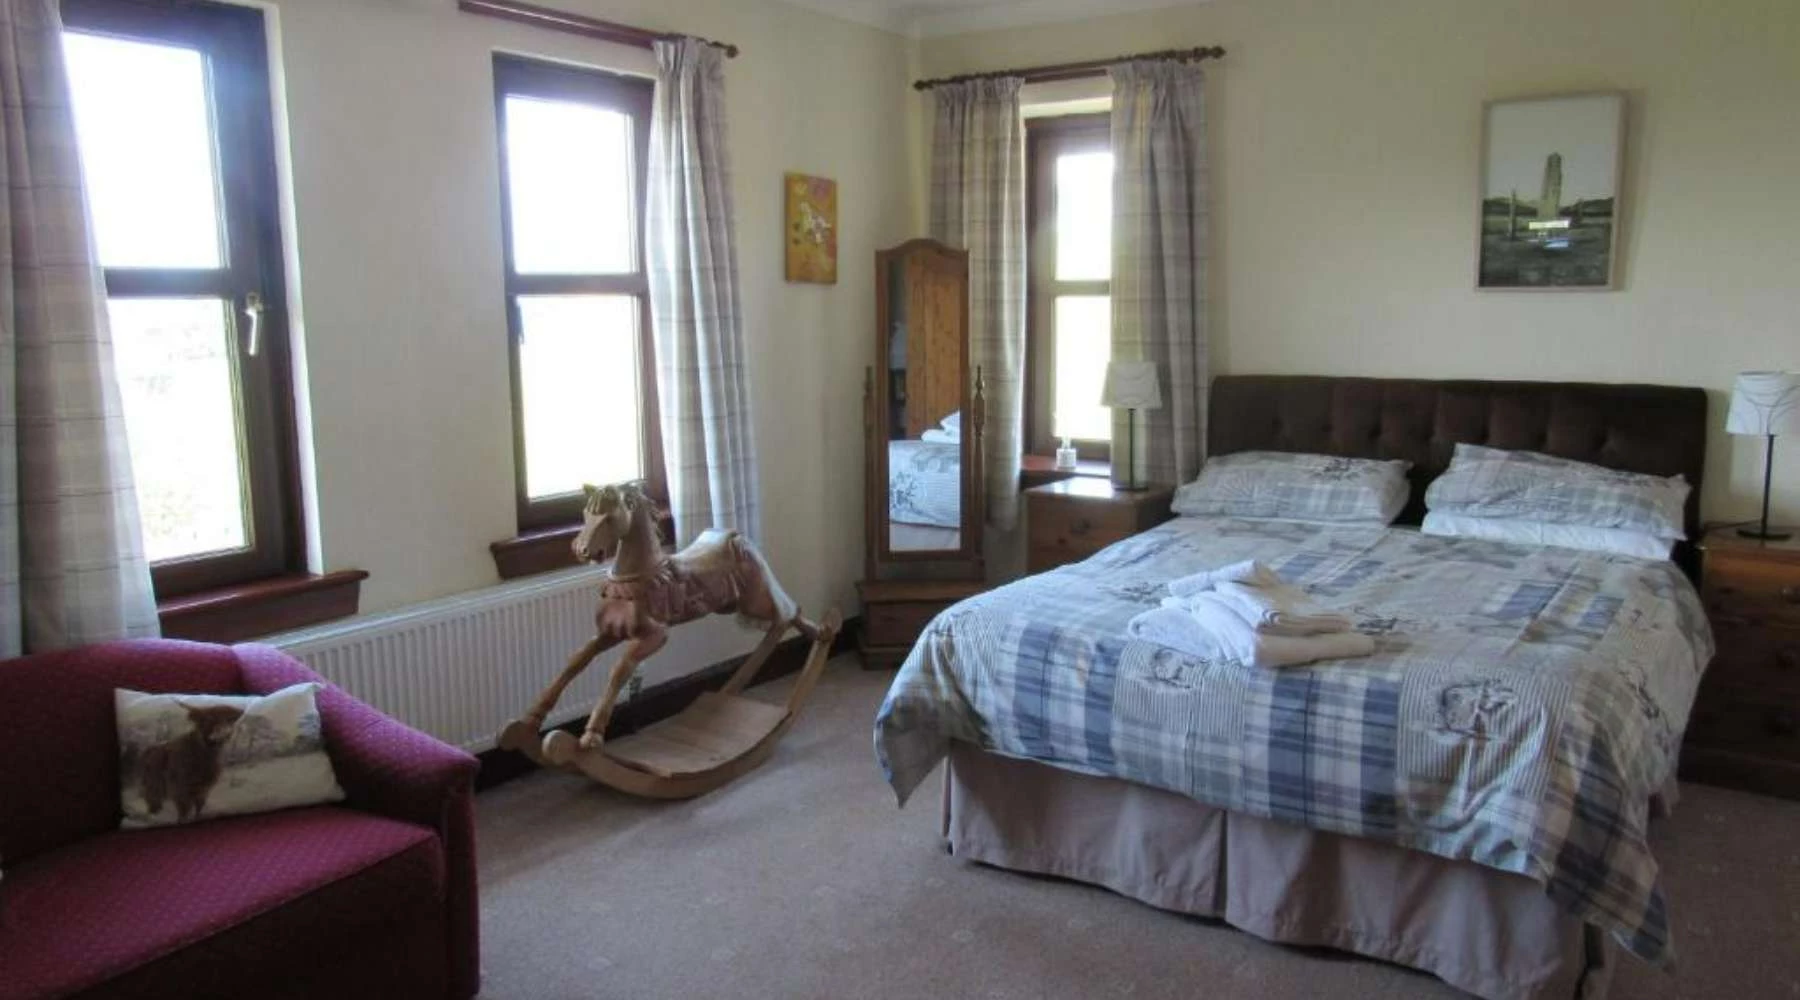 The Greannan Bed and Breakfast (2)